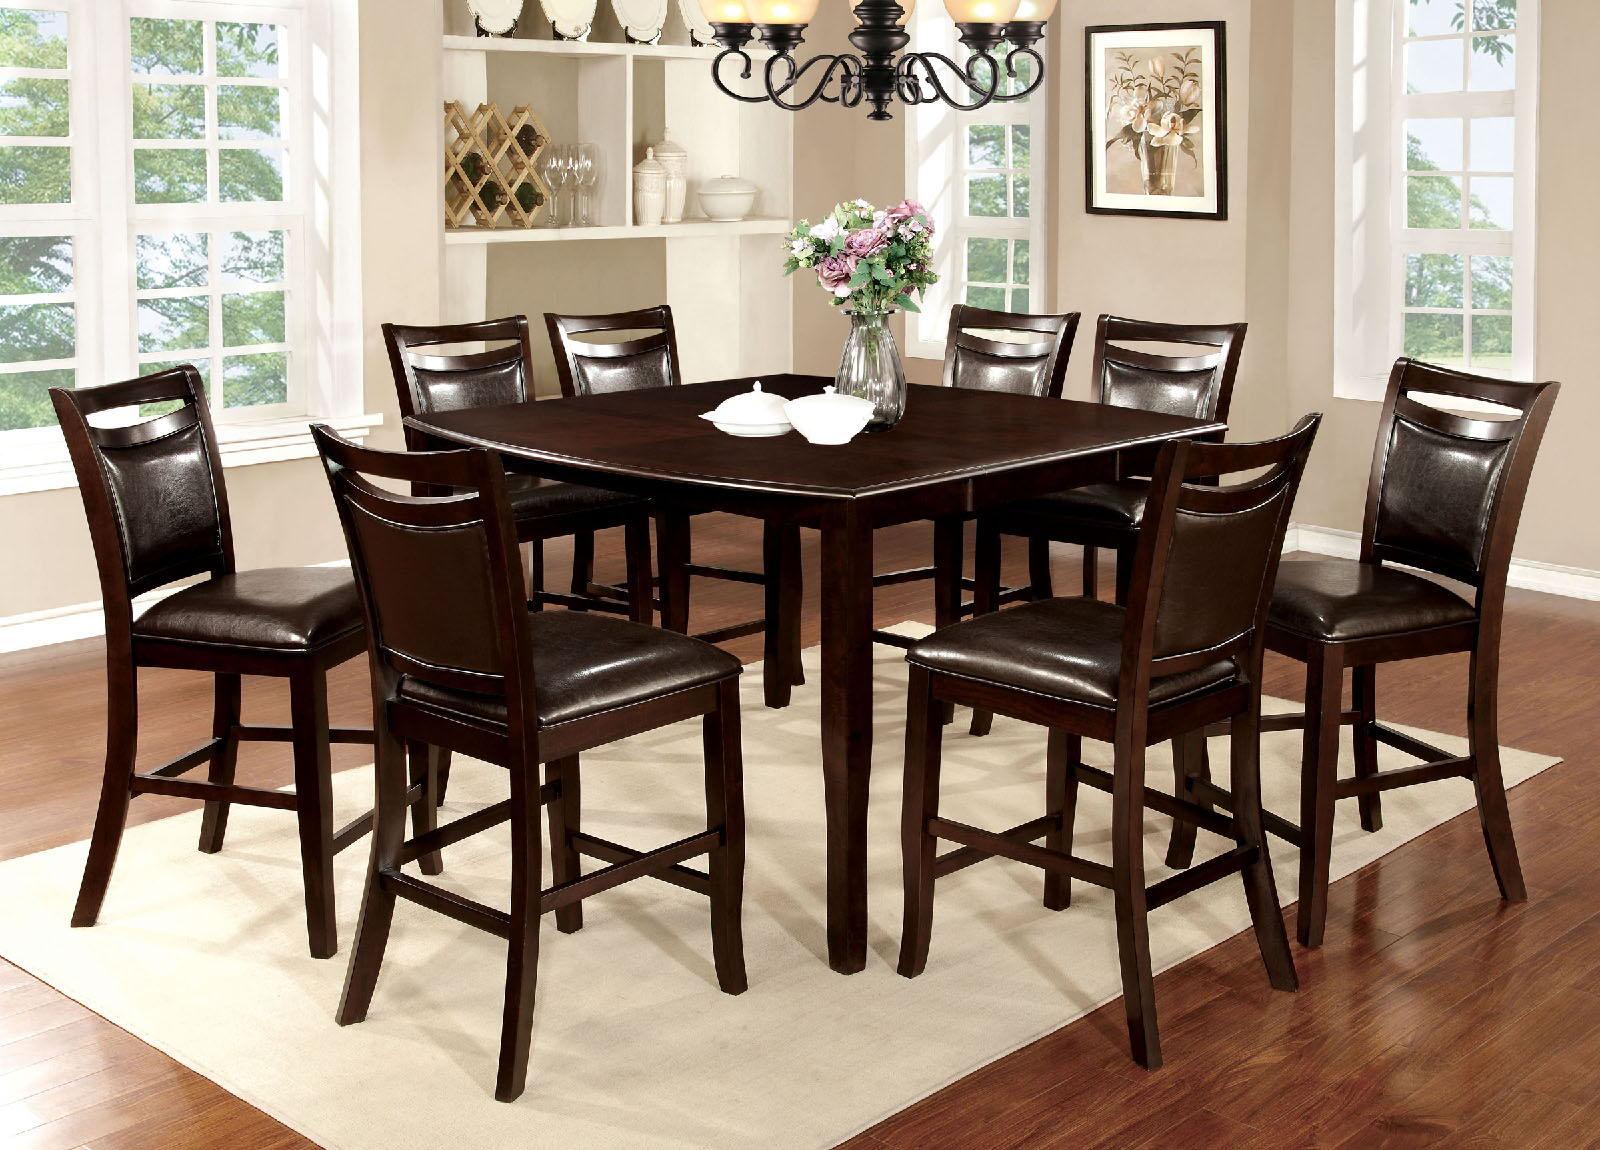 Furniture of America - Woodside - Counter Height Table With Leaf - Espresso - 5th Avenue Furniture